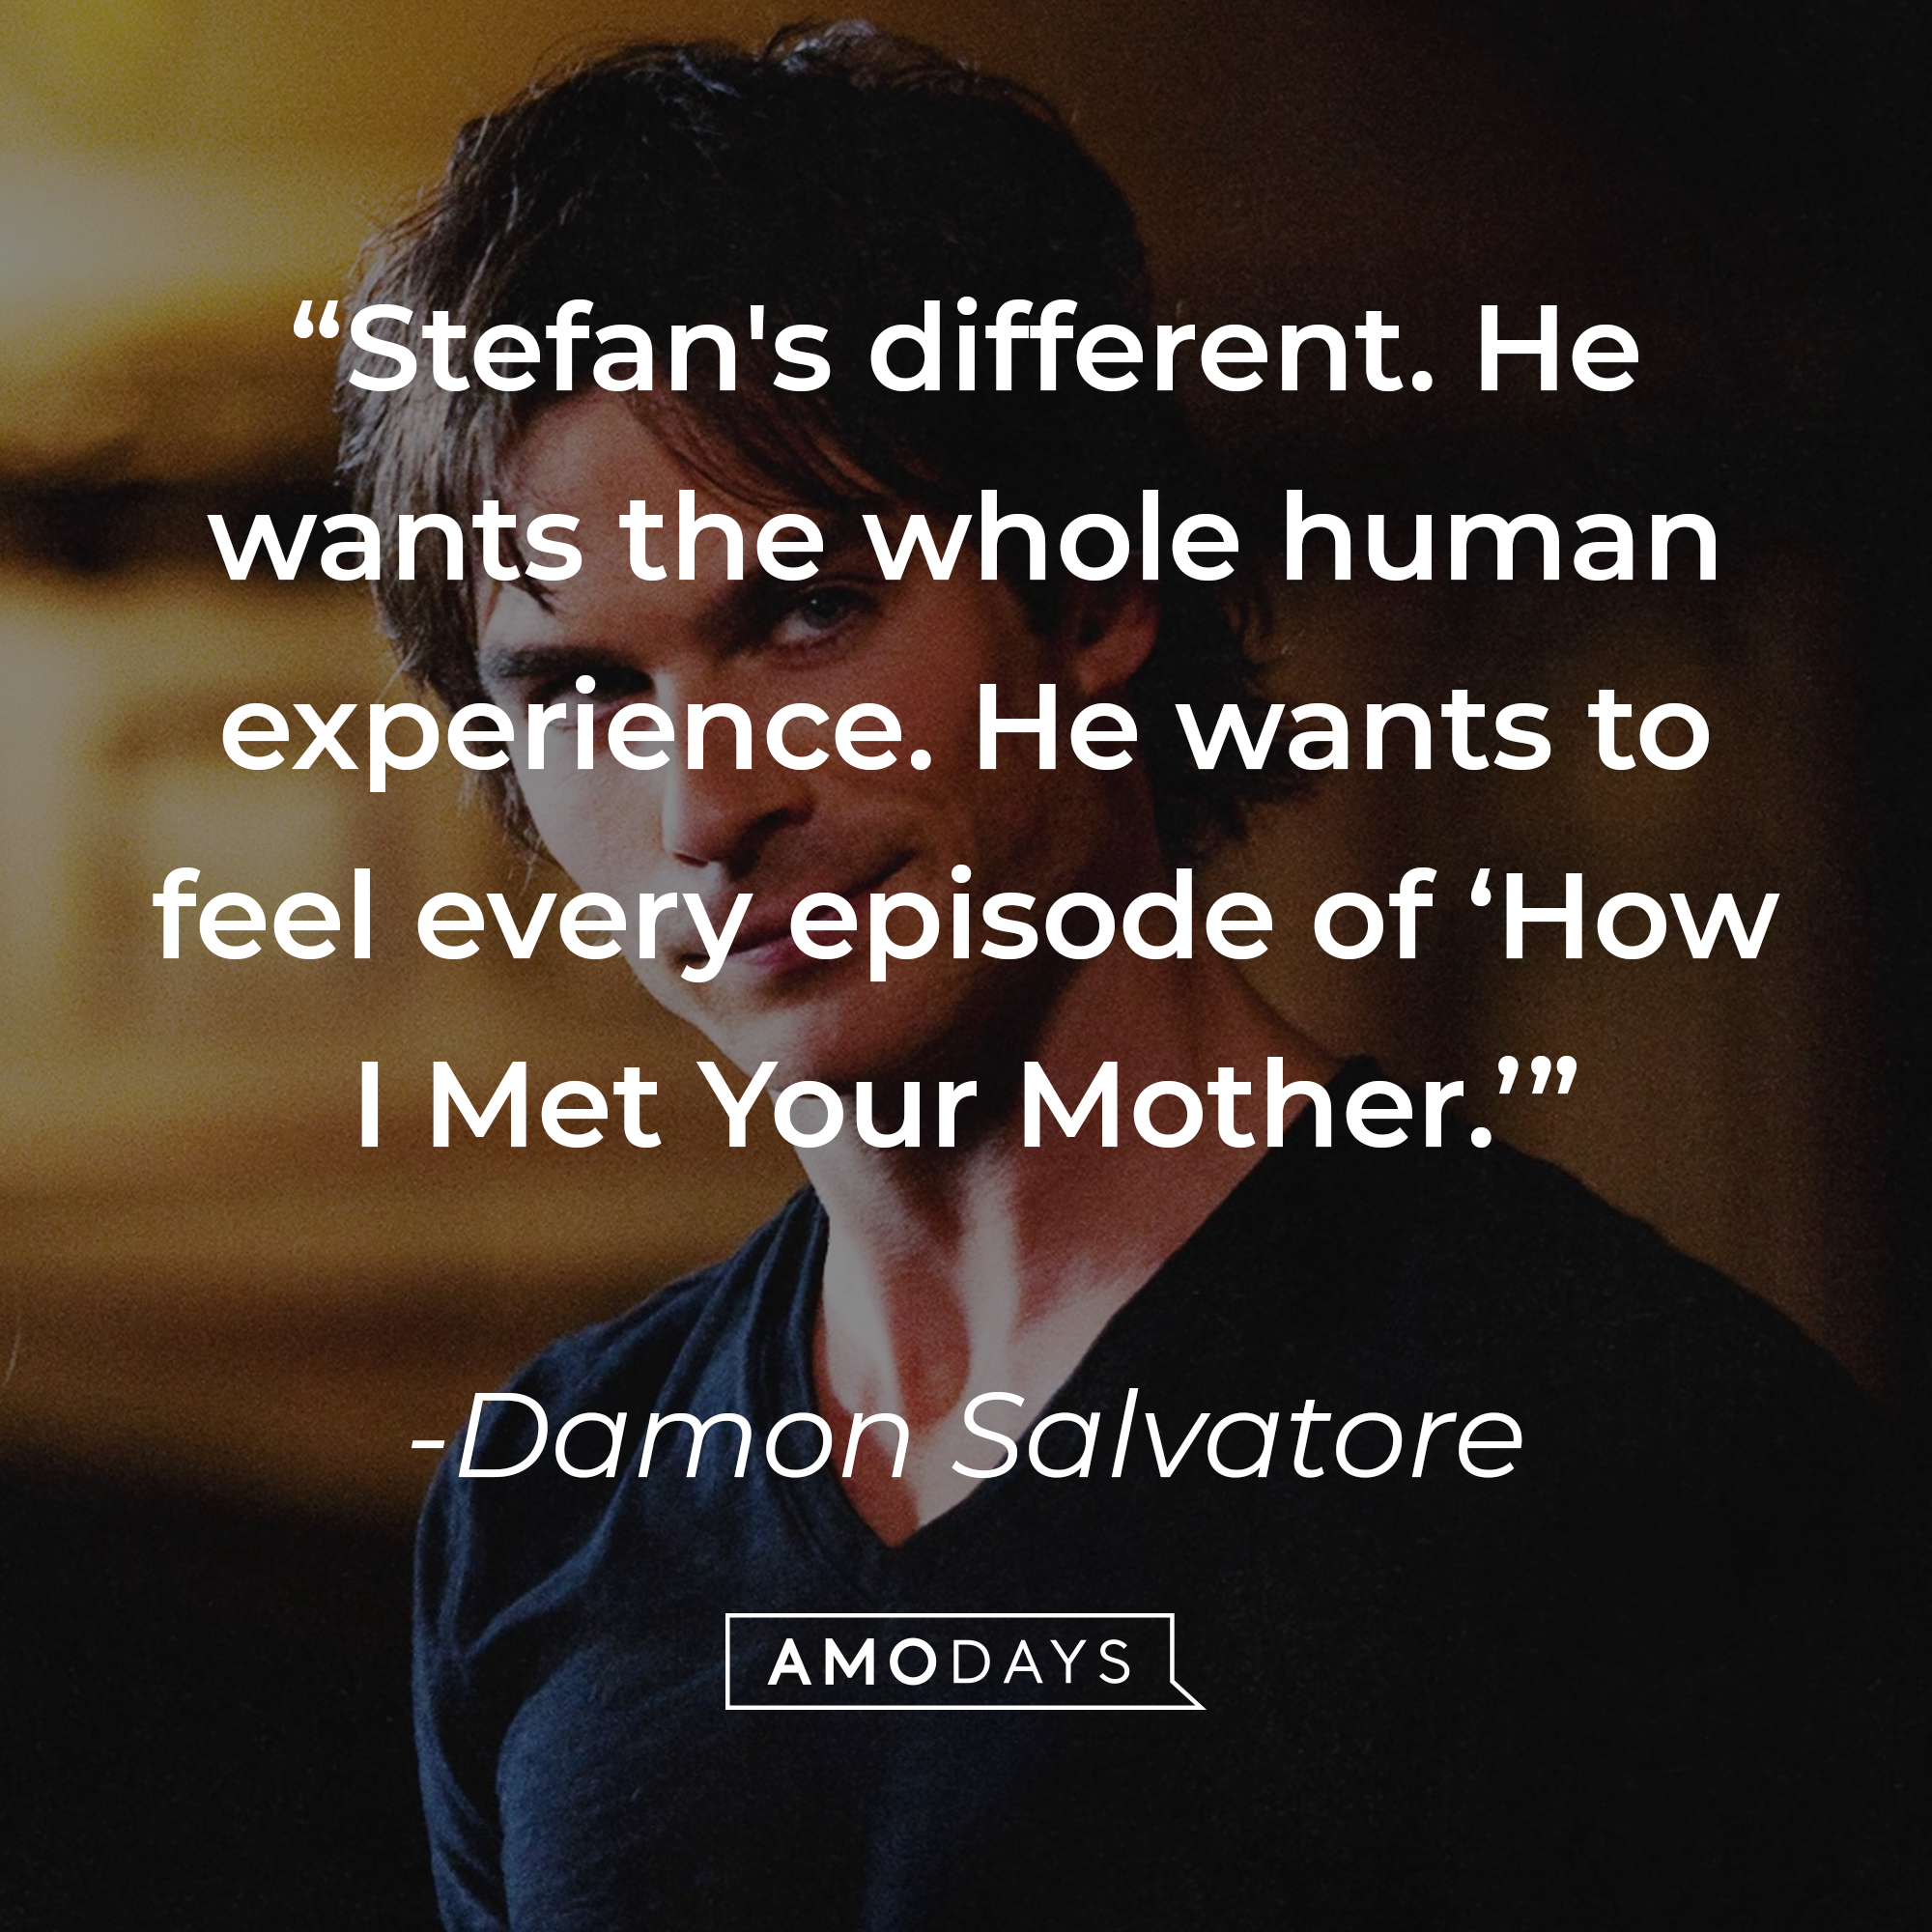 A photo of Damon Salvatore with the quote, "Stefan's different. He wants the whole human experience. He wants to feel every episode of 'How I Met Your Mother.'" | Source: Facebook/thevampirediaries